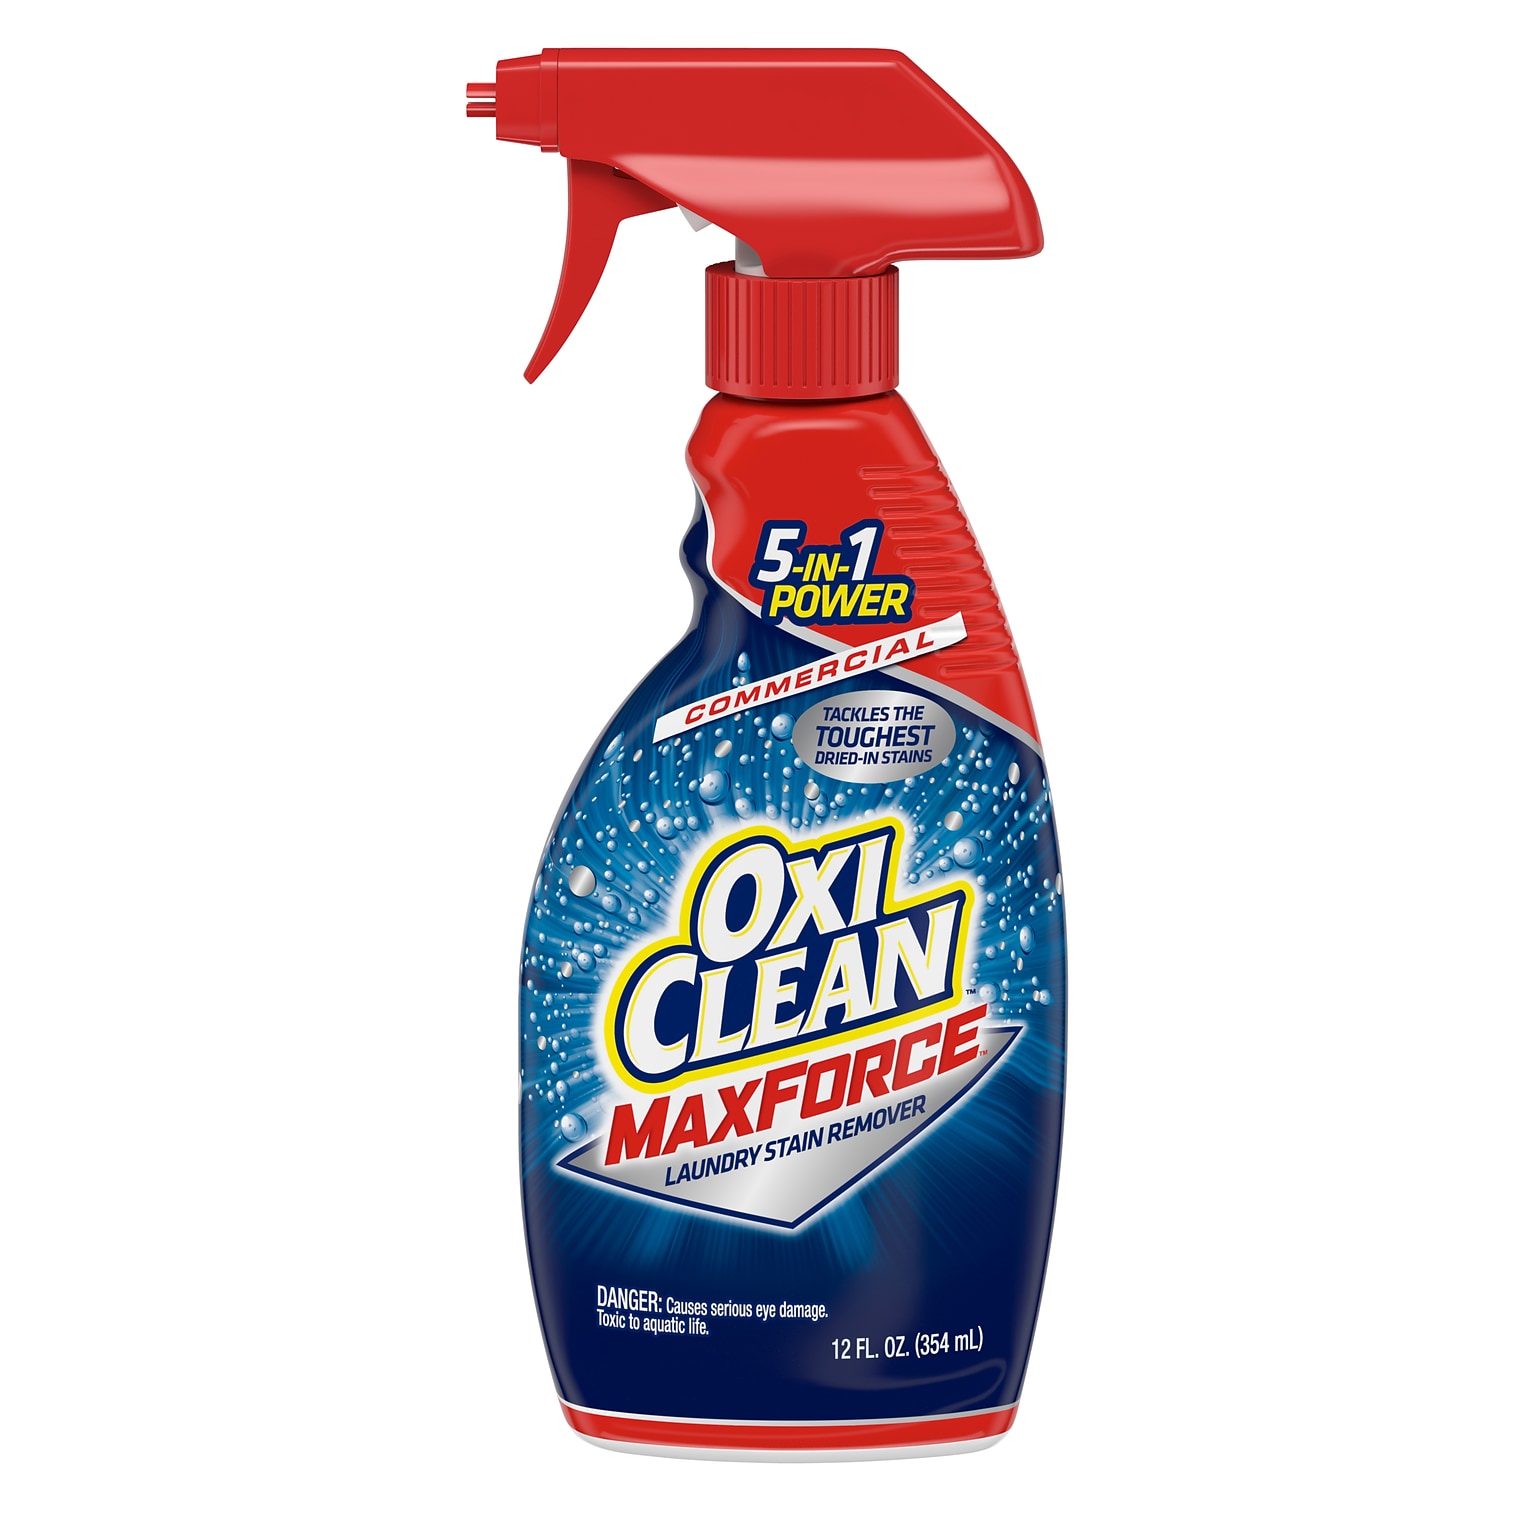 OxiClean Max Force Laundry Stain Remover, Original, 12 oz. (5703700070)